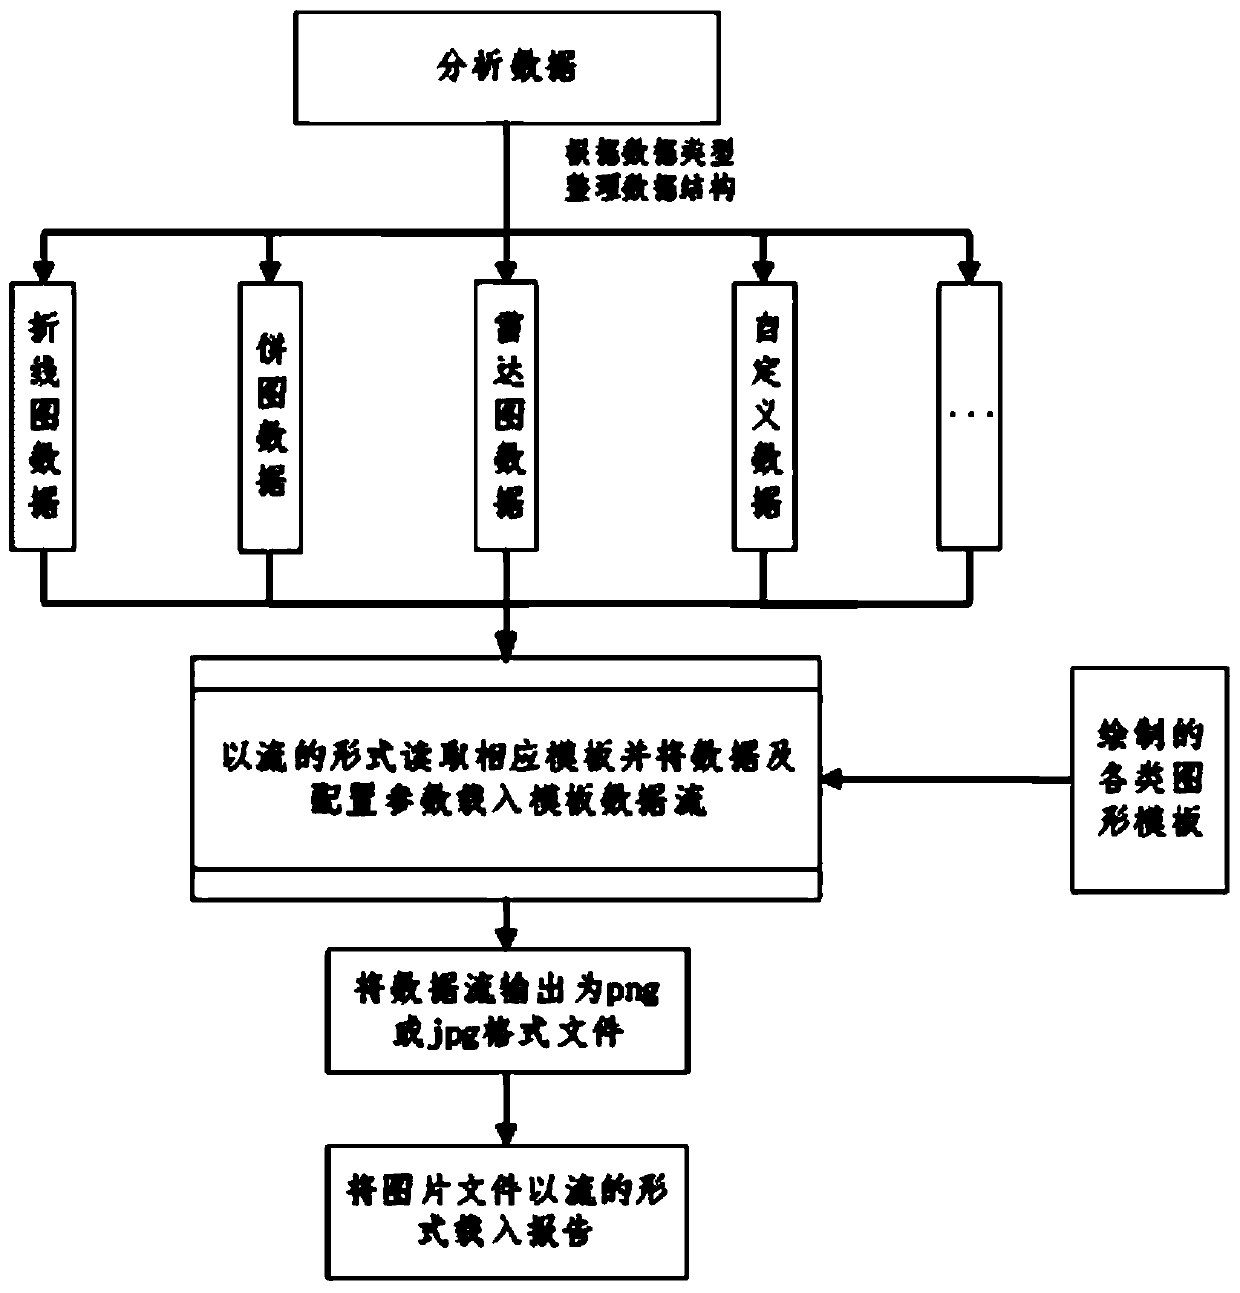 Method for automatically generating analysis graph and loading document in java background